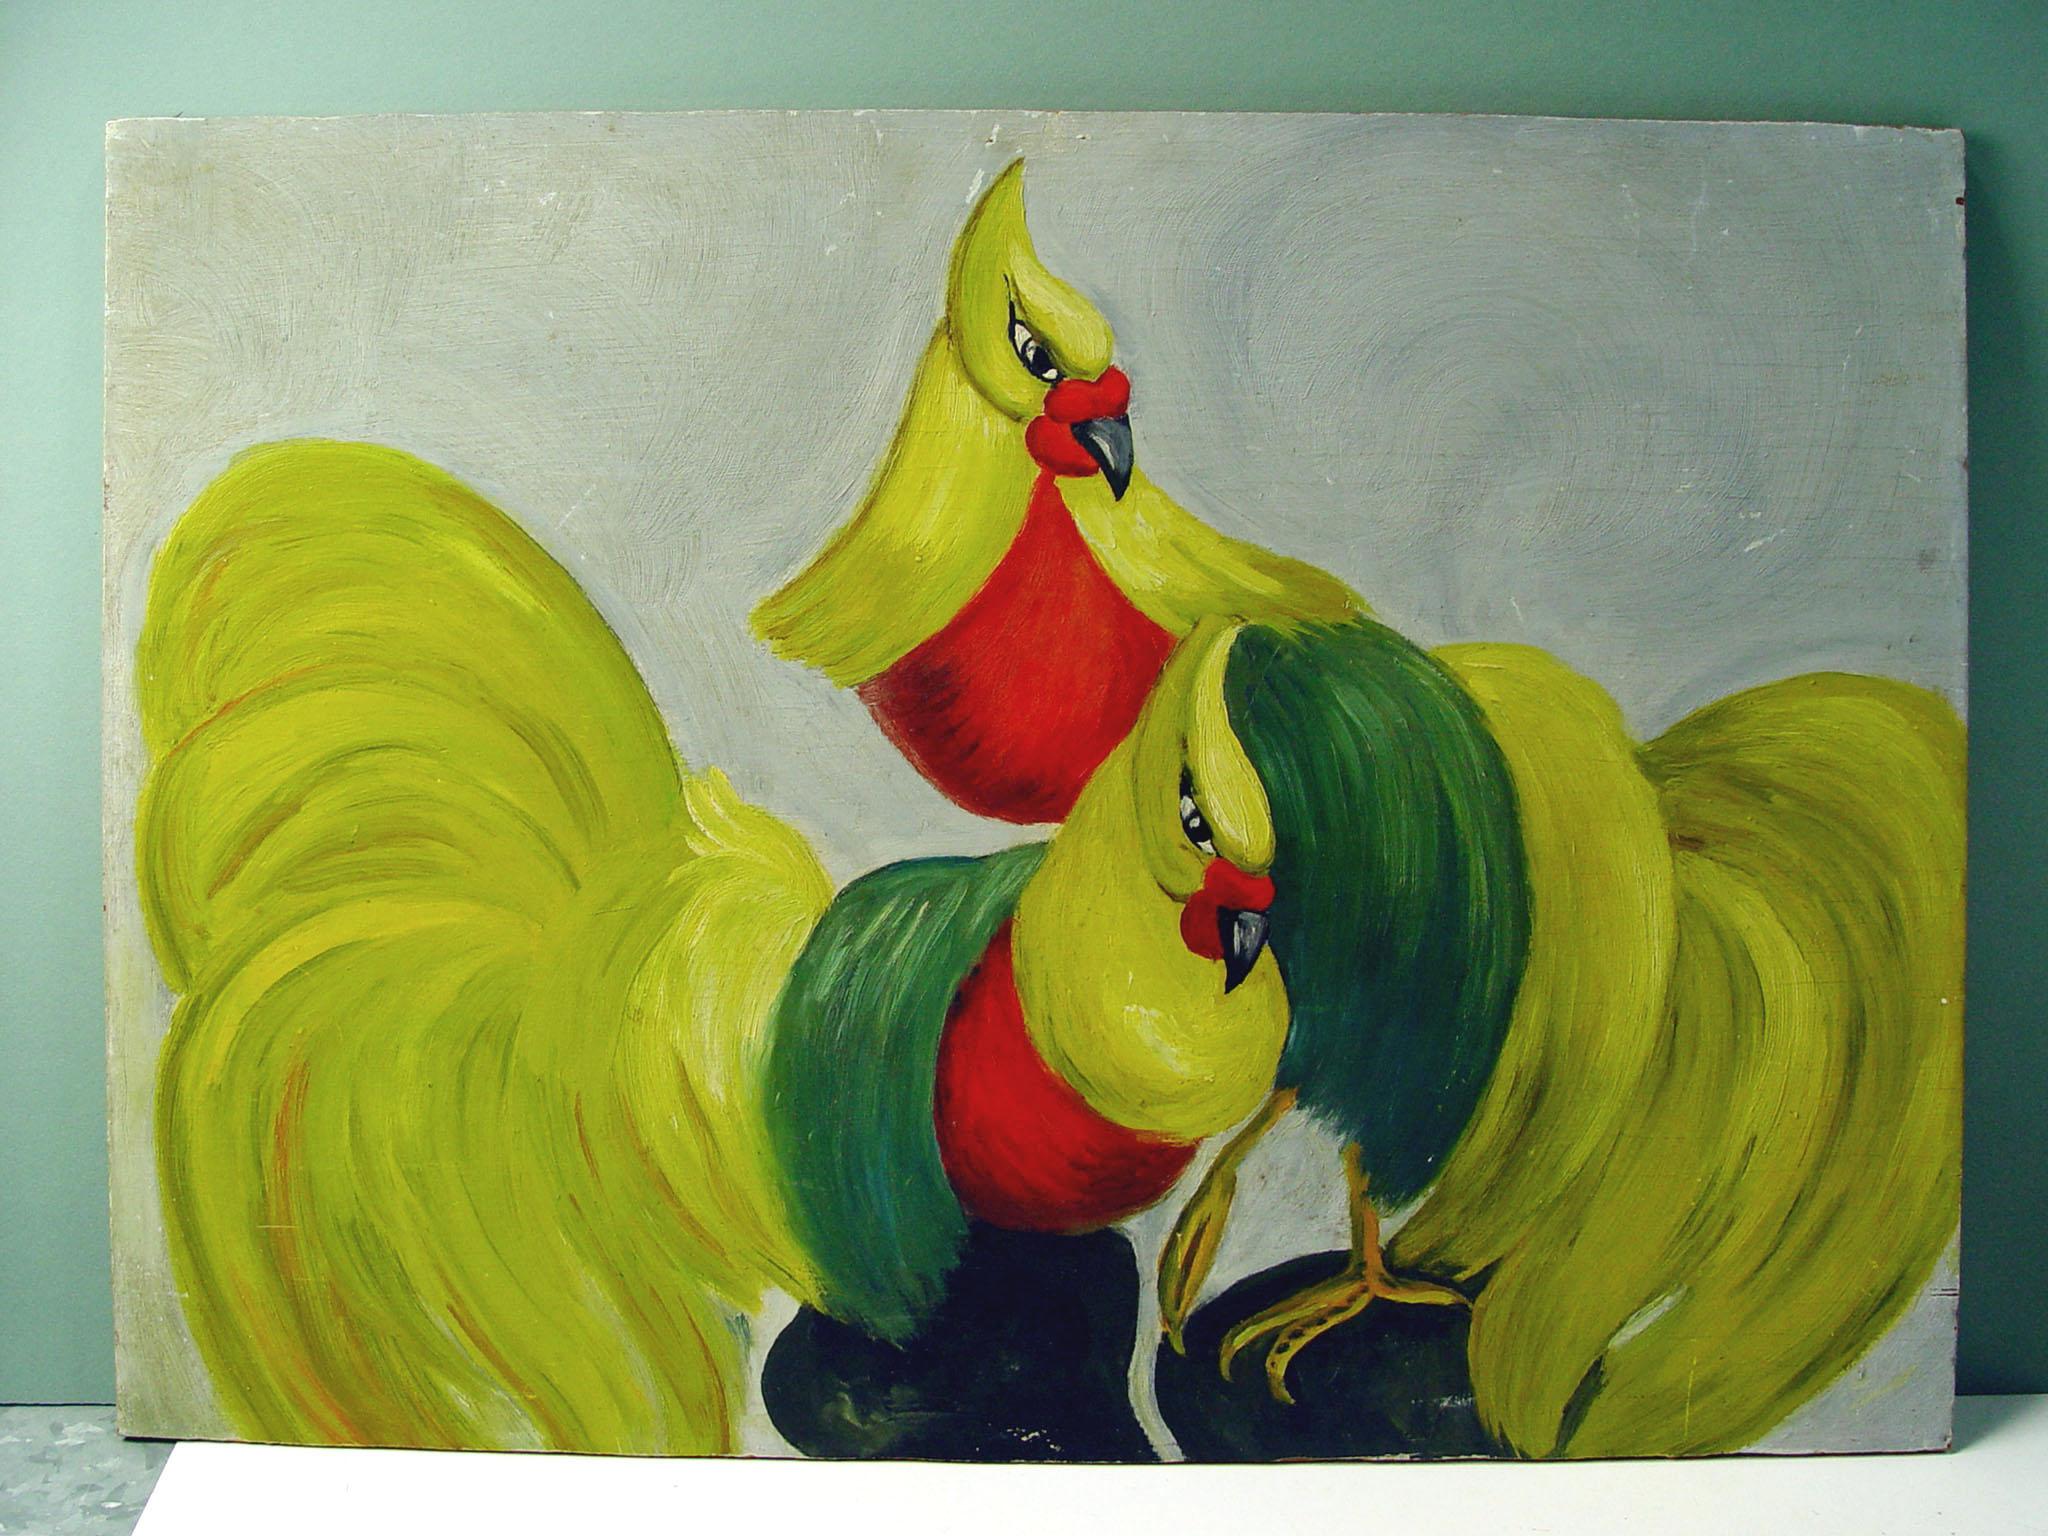 Oil on wood panel of a pair of Modernist golden pheasants. Unsigned. Unframed. Edge wear, small areas of paint loss.